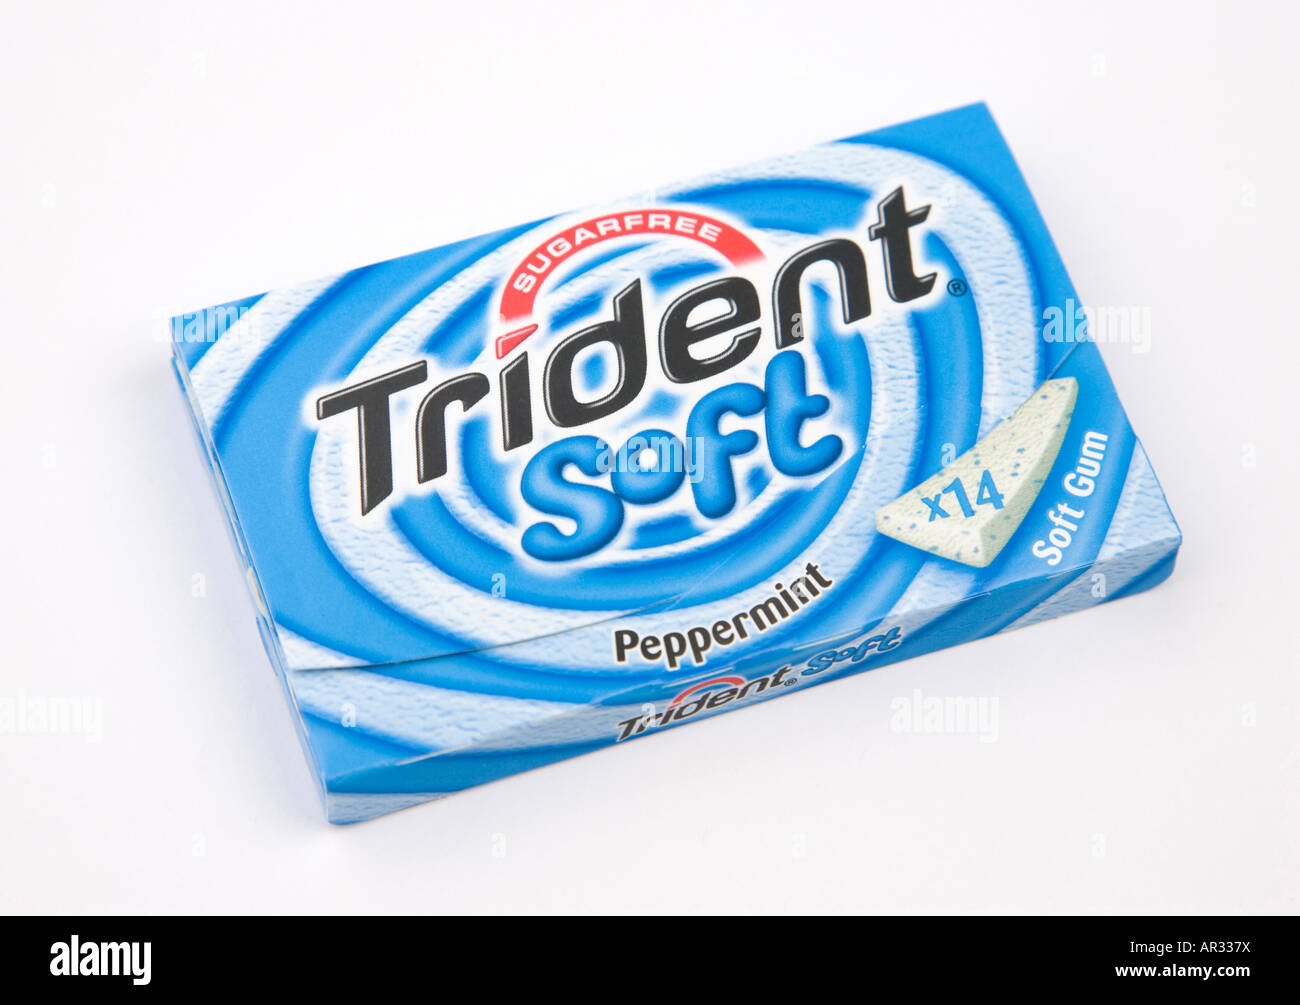 packet of Trident chewing gum Stock Photo - Alamy